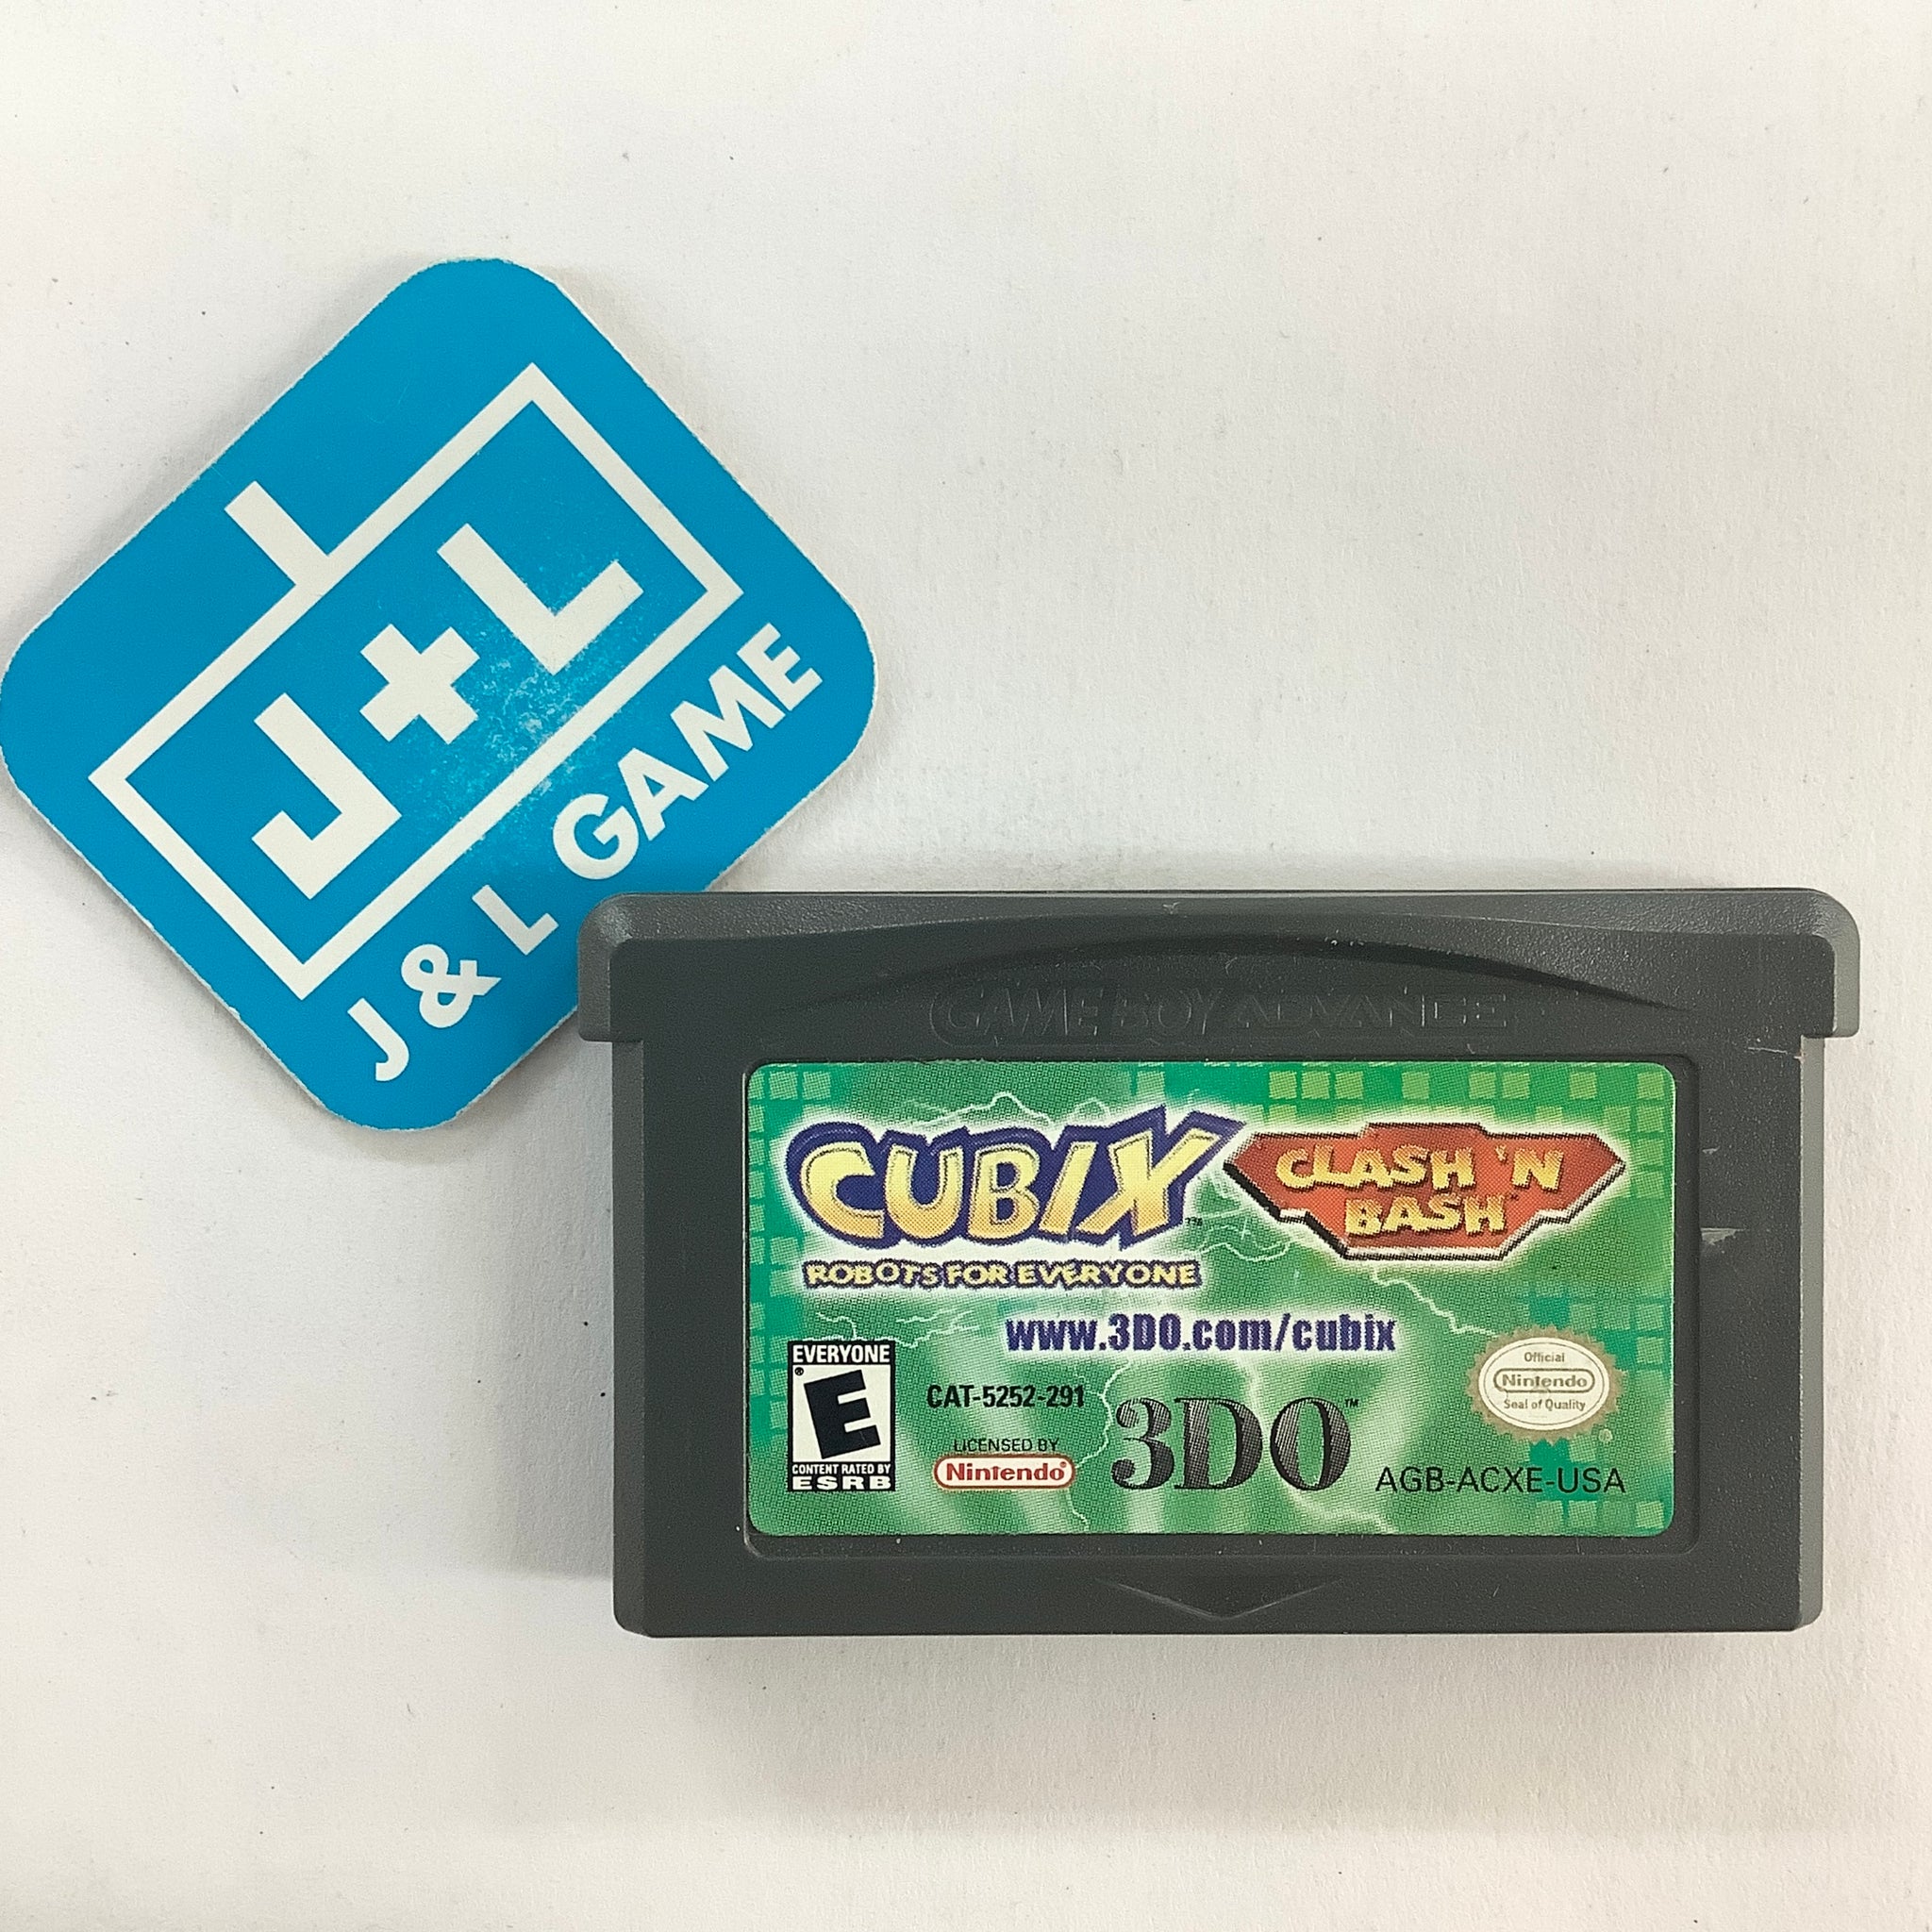 Cubix Robots for Everyone: Clash 'n Bash - (GBA) Game Boy Advance [Pre-Owned] Video Games 3DO   